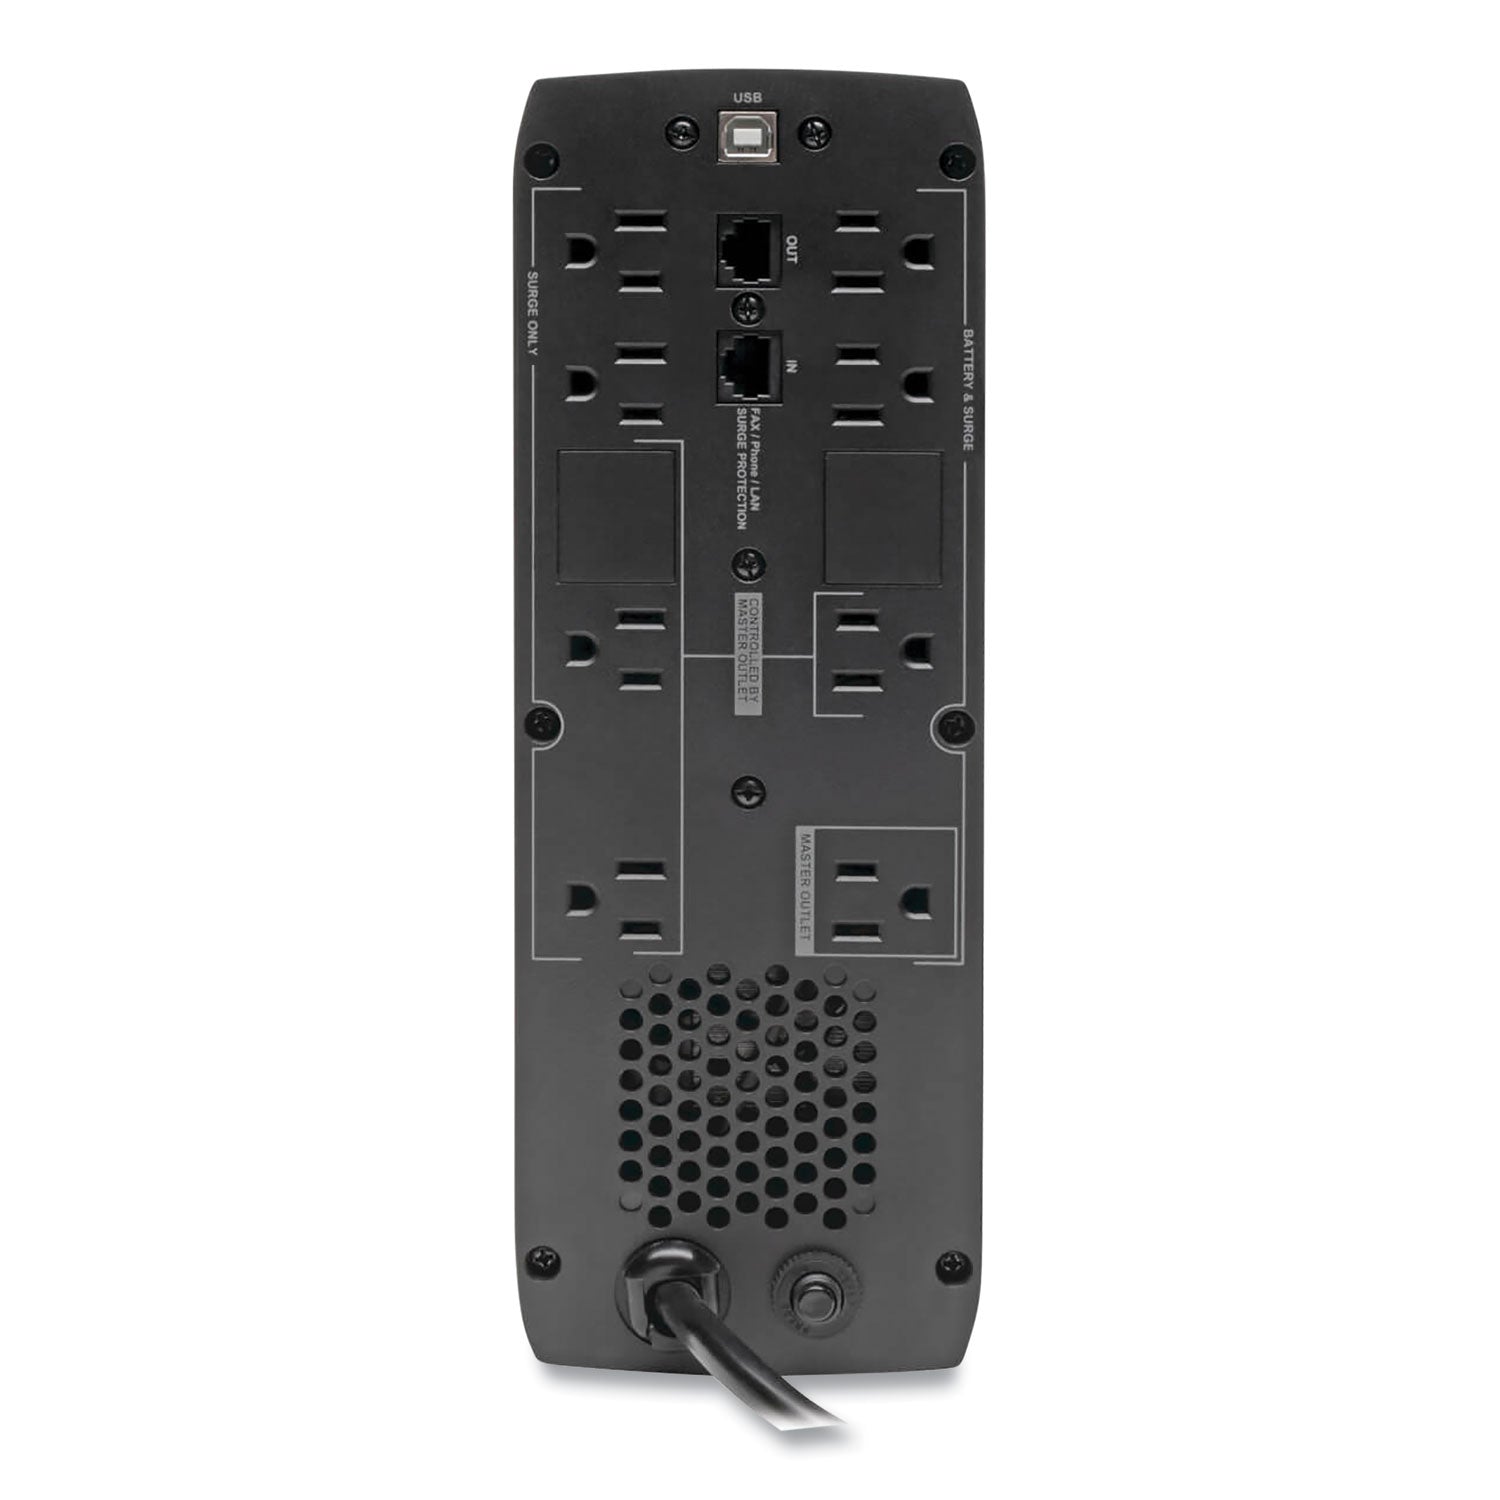 eco-series-desktop-ups-systems-with-usb-monitoring-8-outlets-1000-va-316-j_trpeco1000lcd - 2